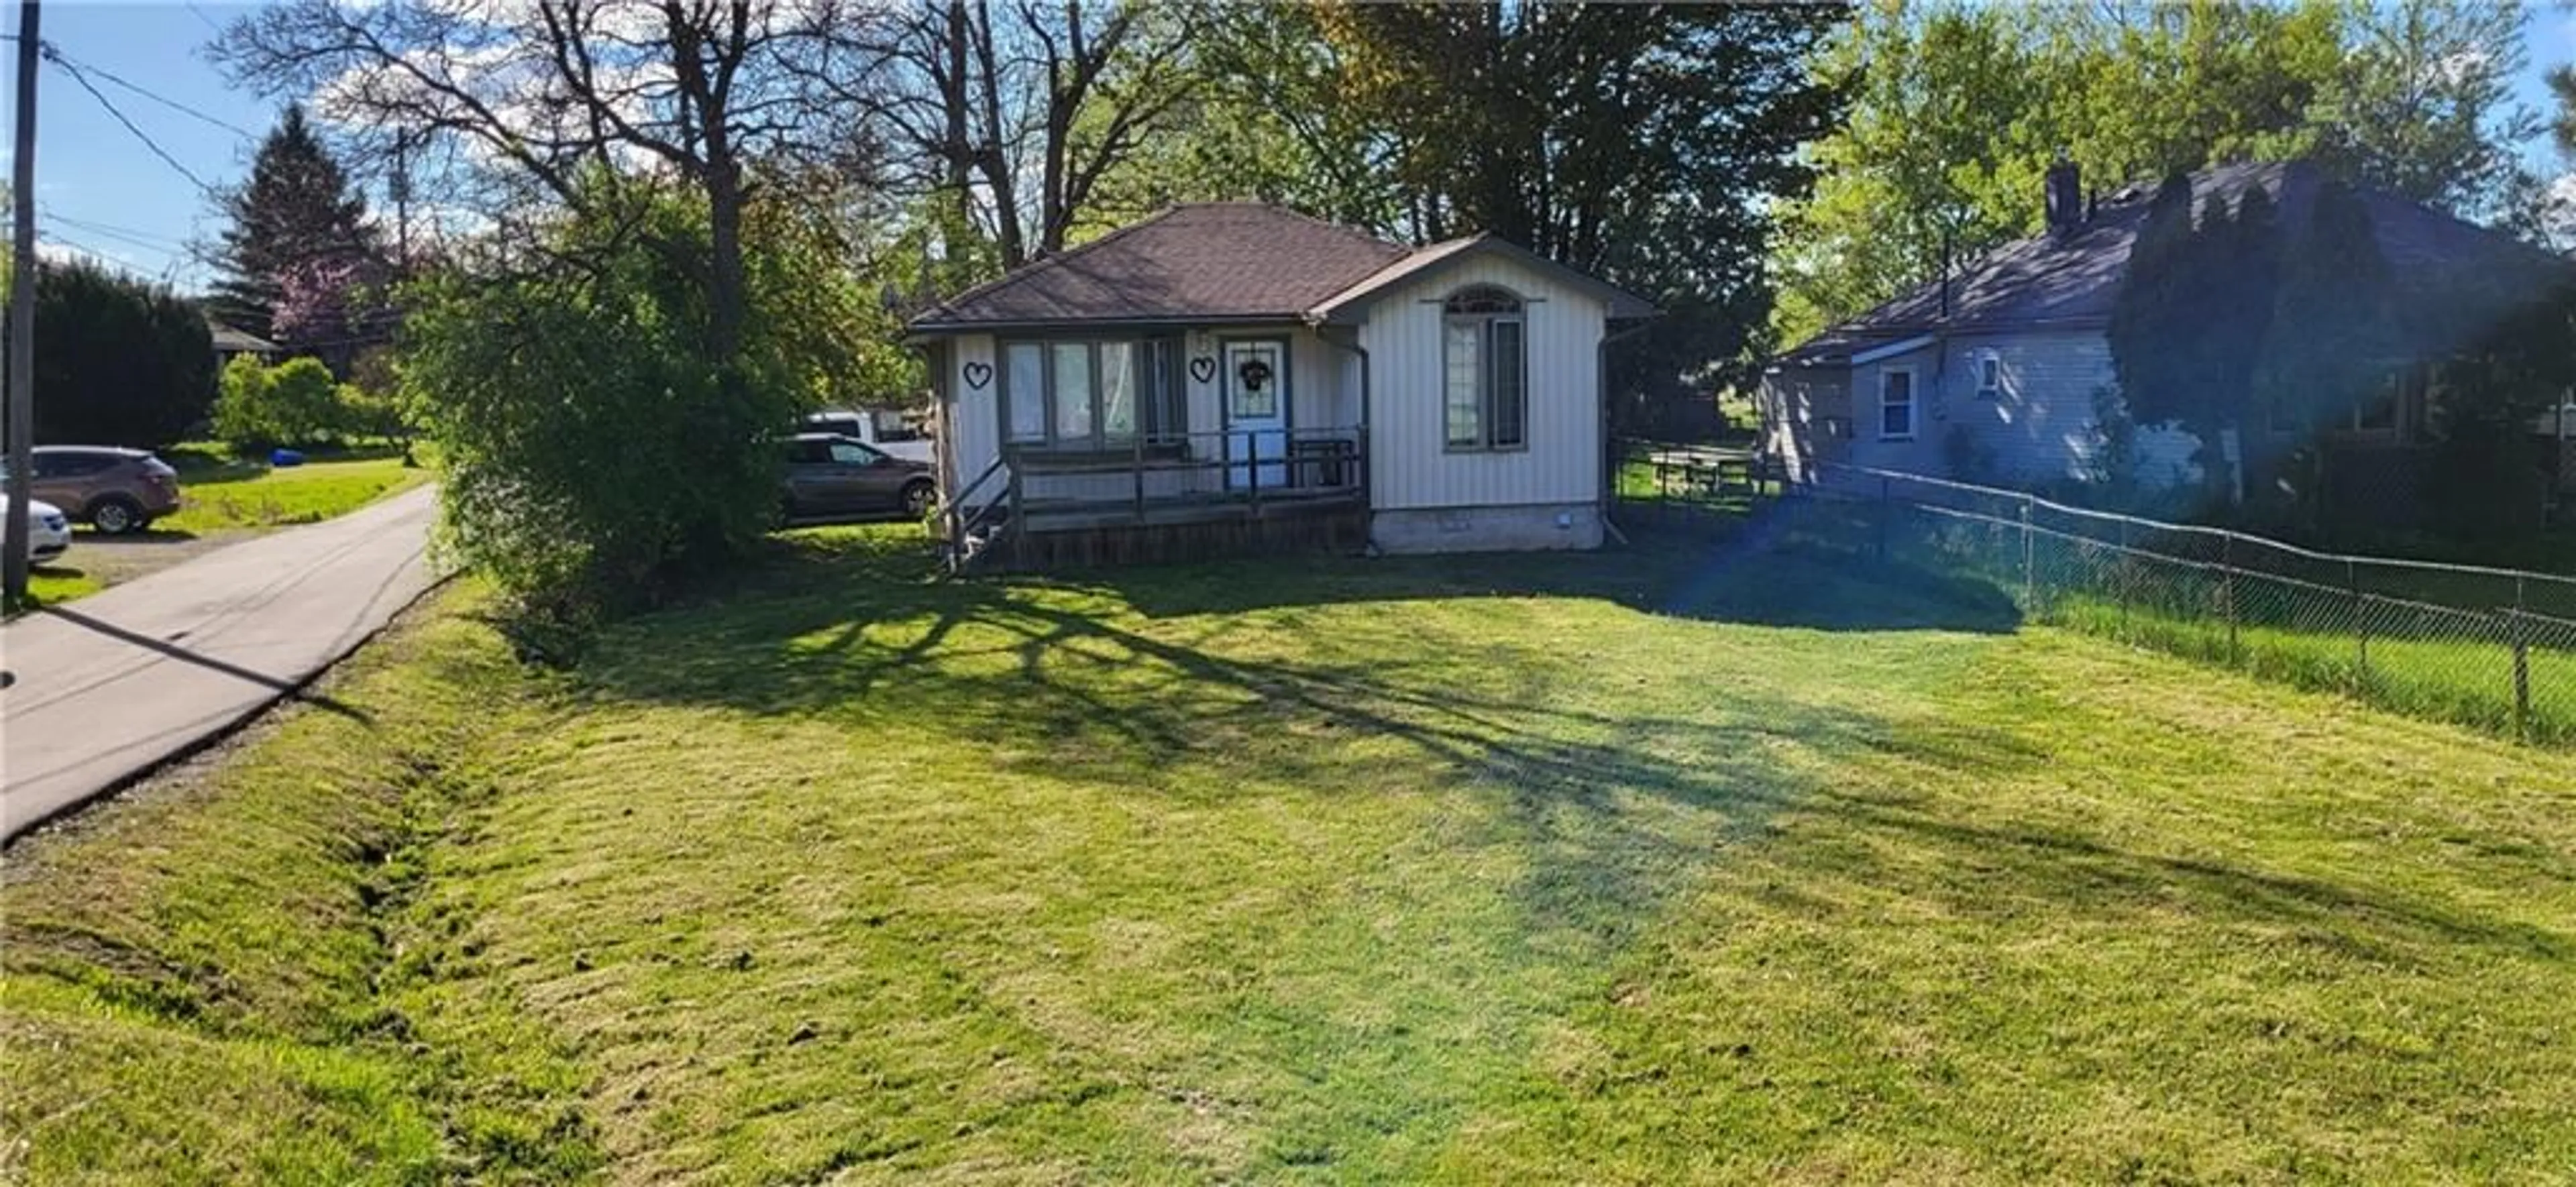 Frontside or backside of a home for 2274 Upper James St, Hamilton Ontario L0R 1W0